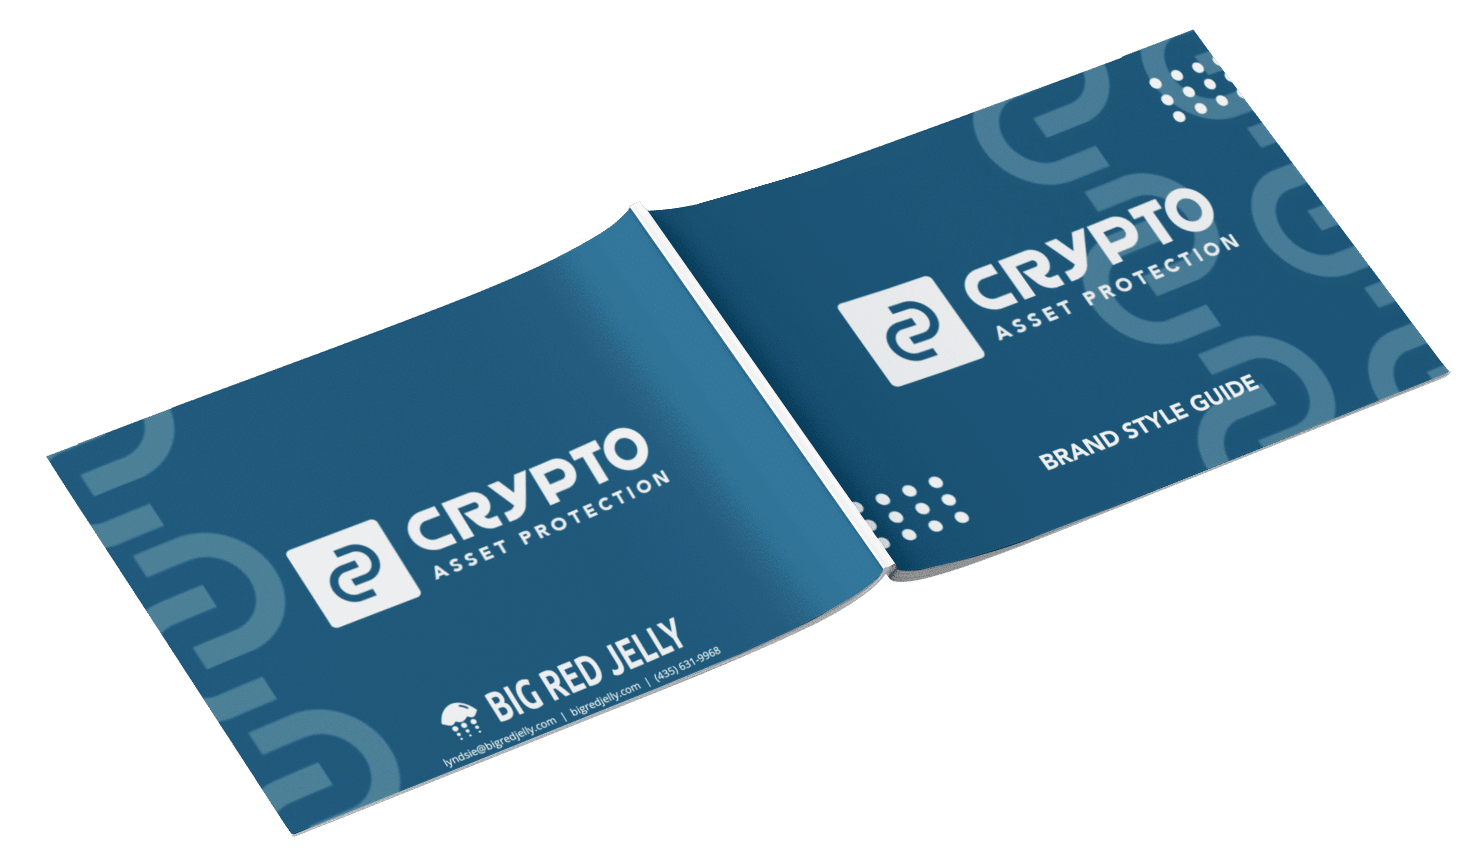 Crypto mockup of full brand style guide developed at Big Red Jelly Provo Utah